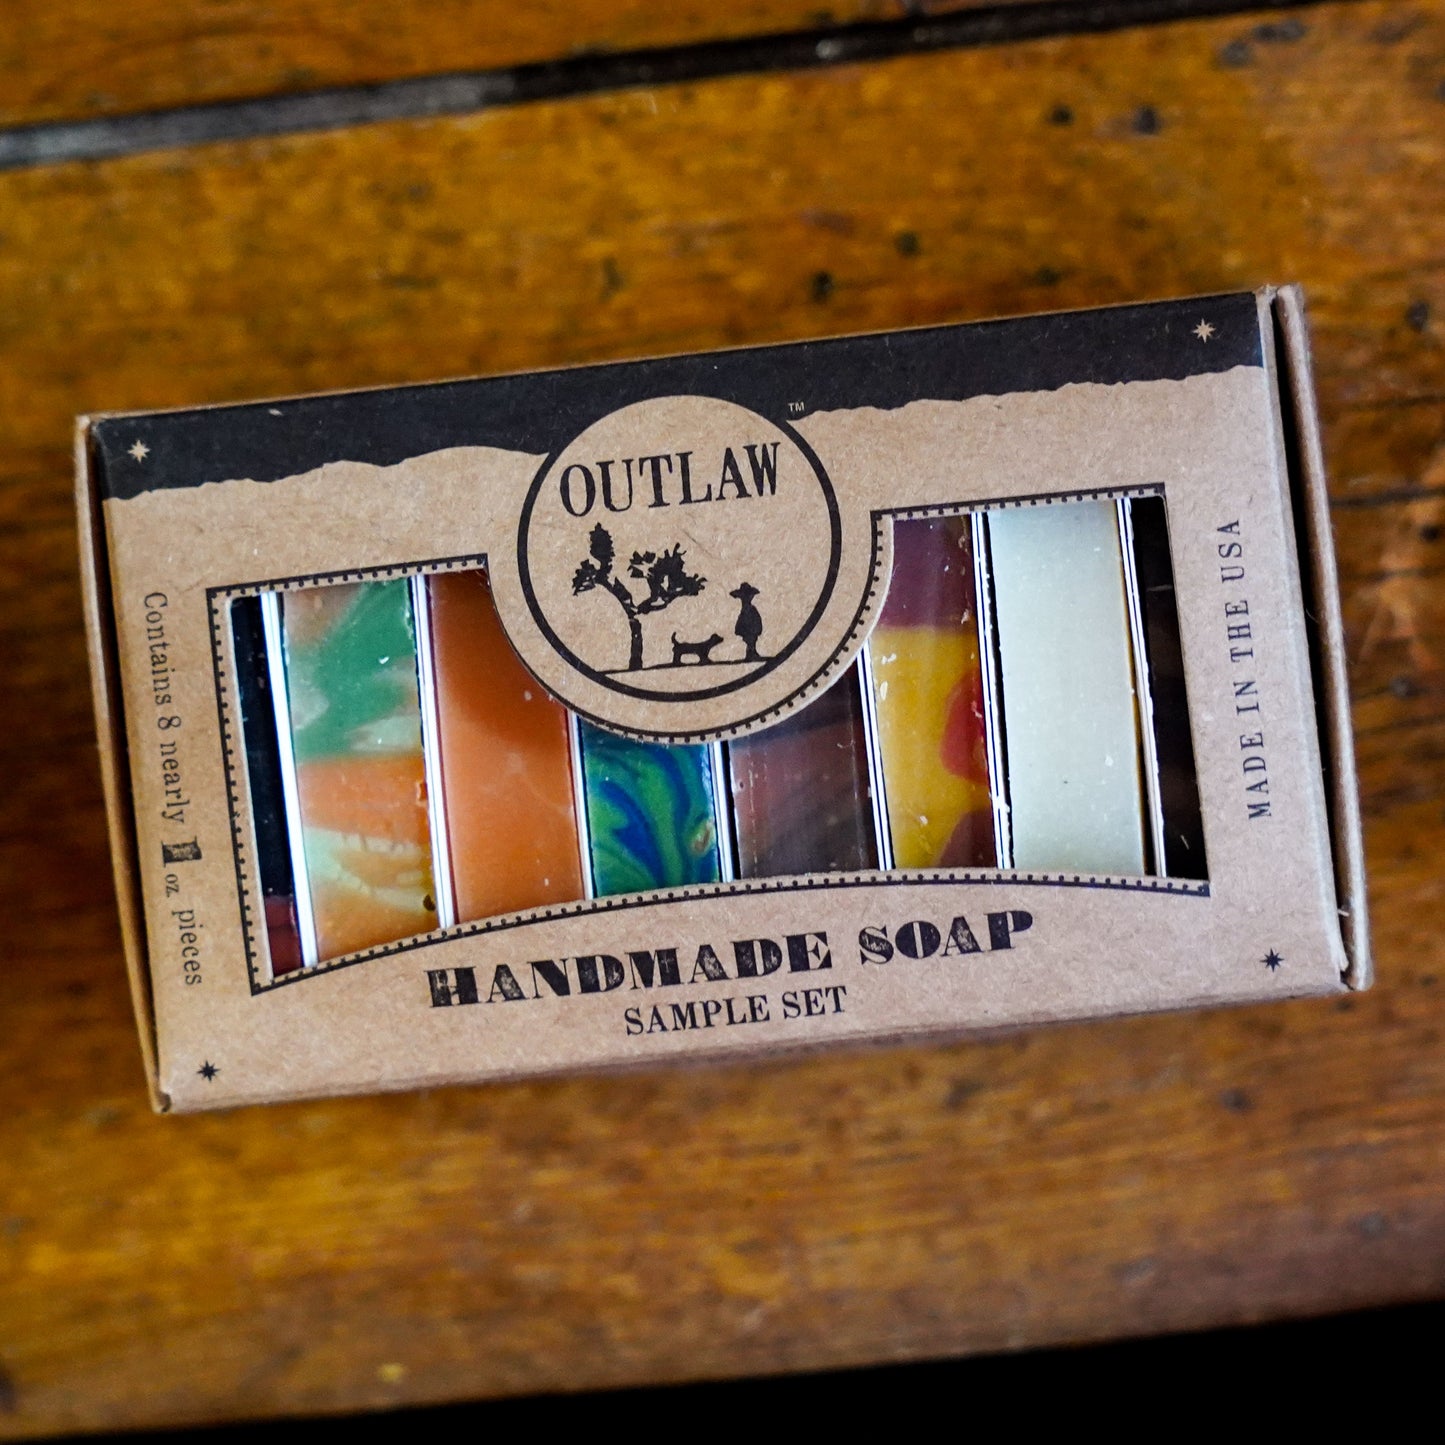 Handmade Soap Samples from Outlaw